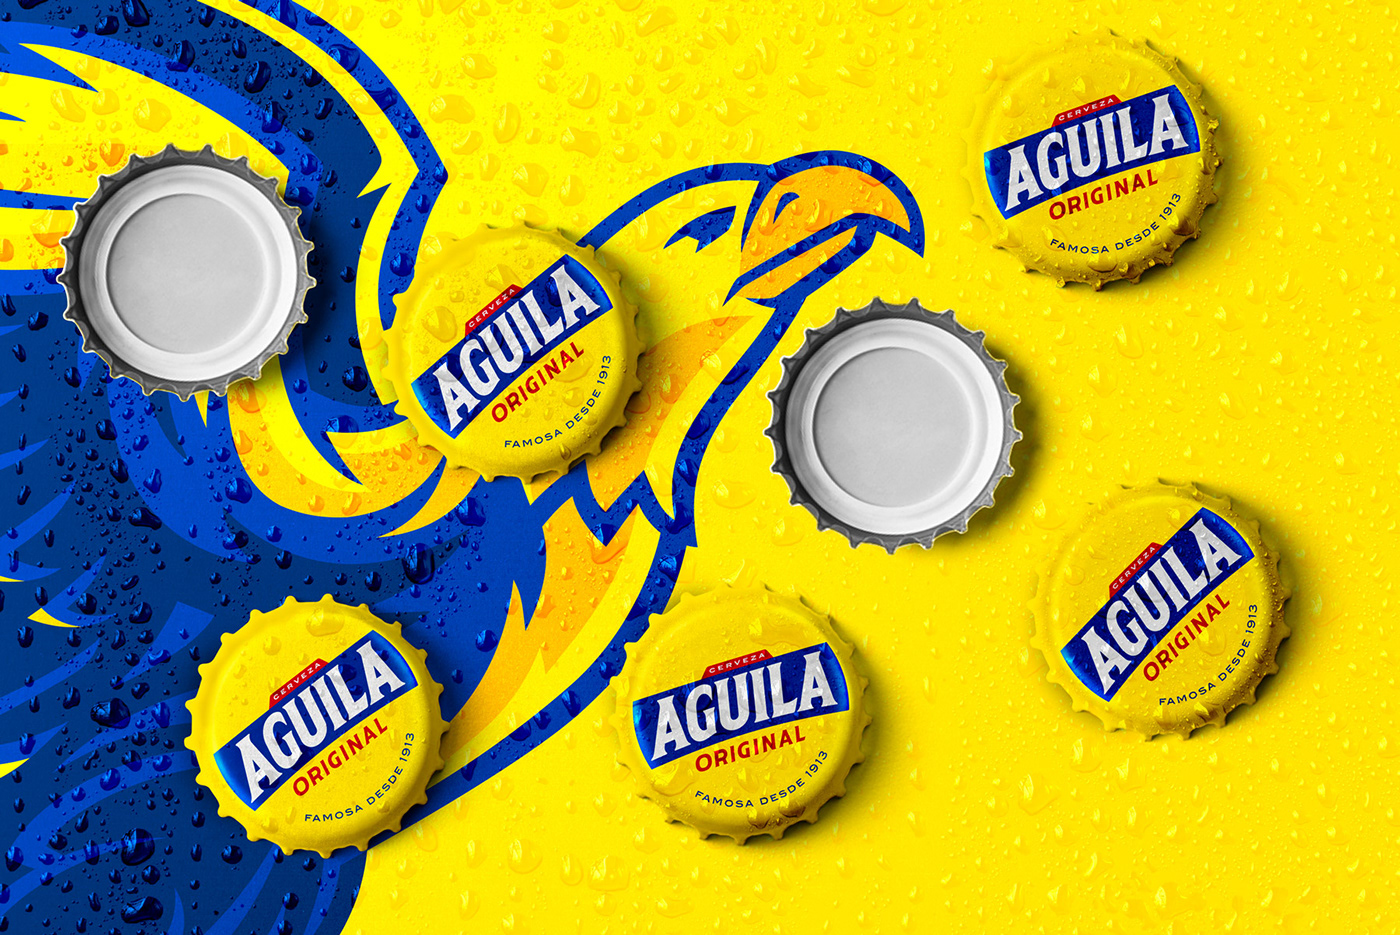 beer aguila colombia Sabrosura barranquilla Packaging bottle can yellow Rebrand